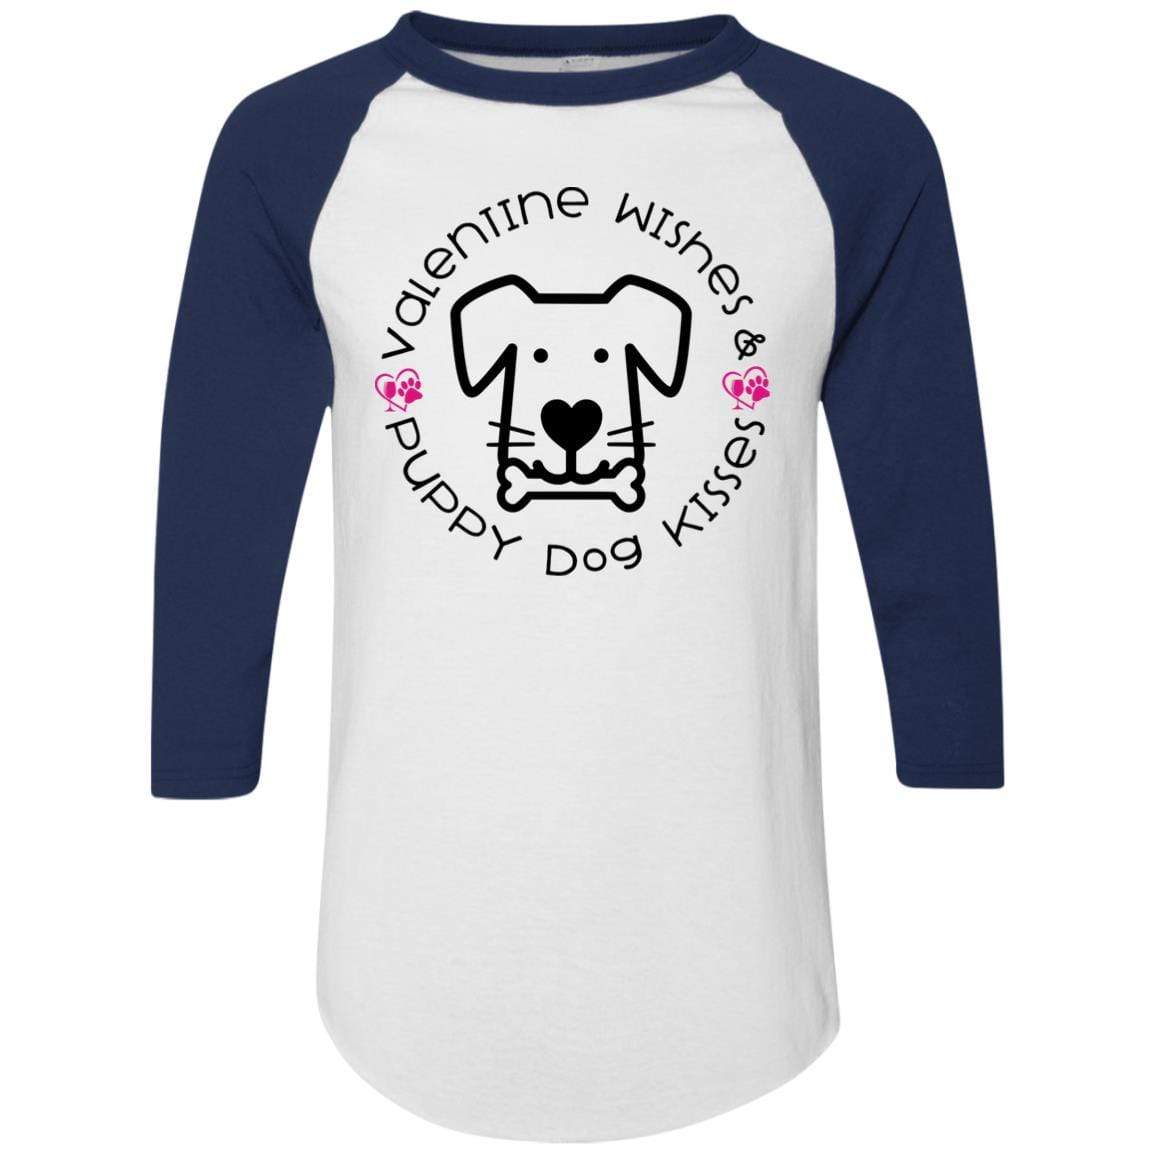 T-Shirts White/Navy / S Winey Bitches Co 'Valentine Wishes and Puppy Dog Kisses" (Dog) Colorblock Raglan Jersey WineyBitchesCo